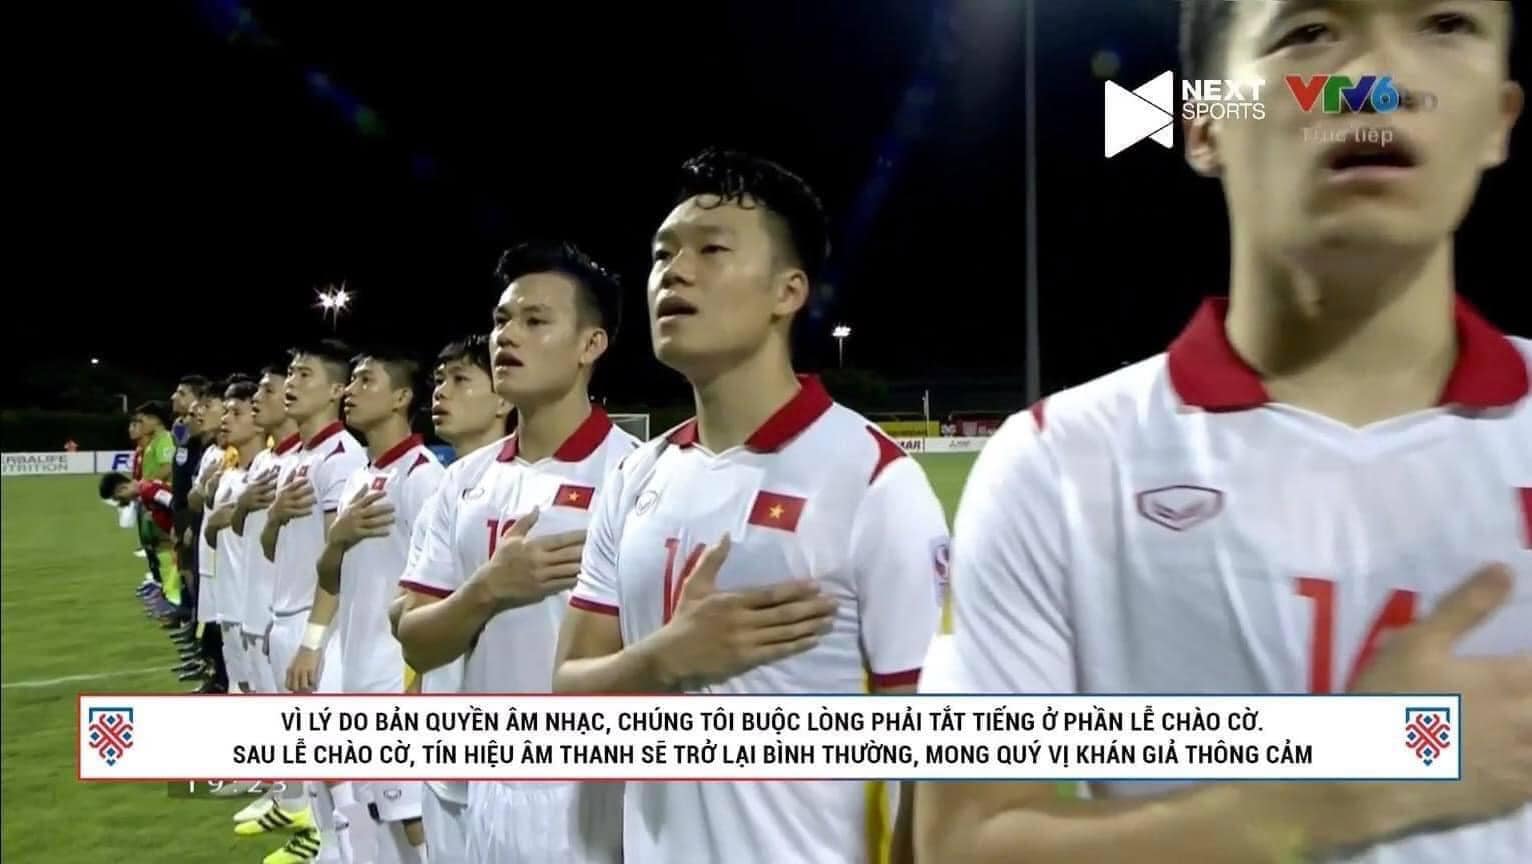 Vietnam’s national anthem muted in football match aired on YouTube over copyright concerns